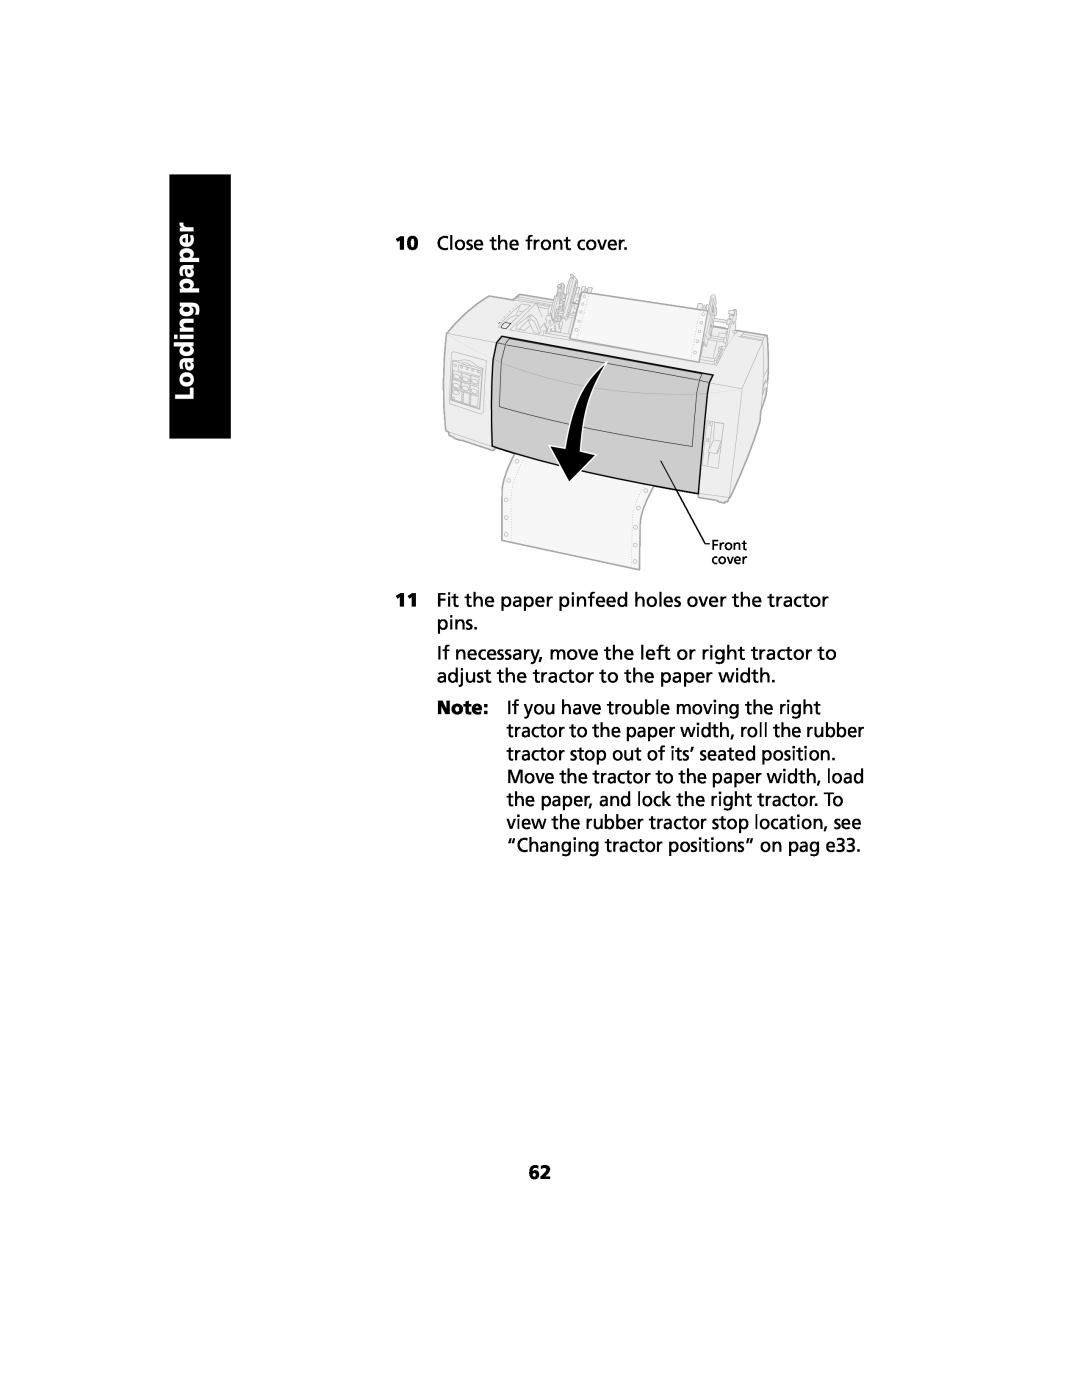 Lexmark 2480 manual Loading paper, Close the front cover 